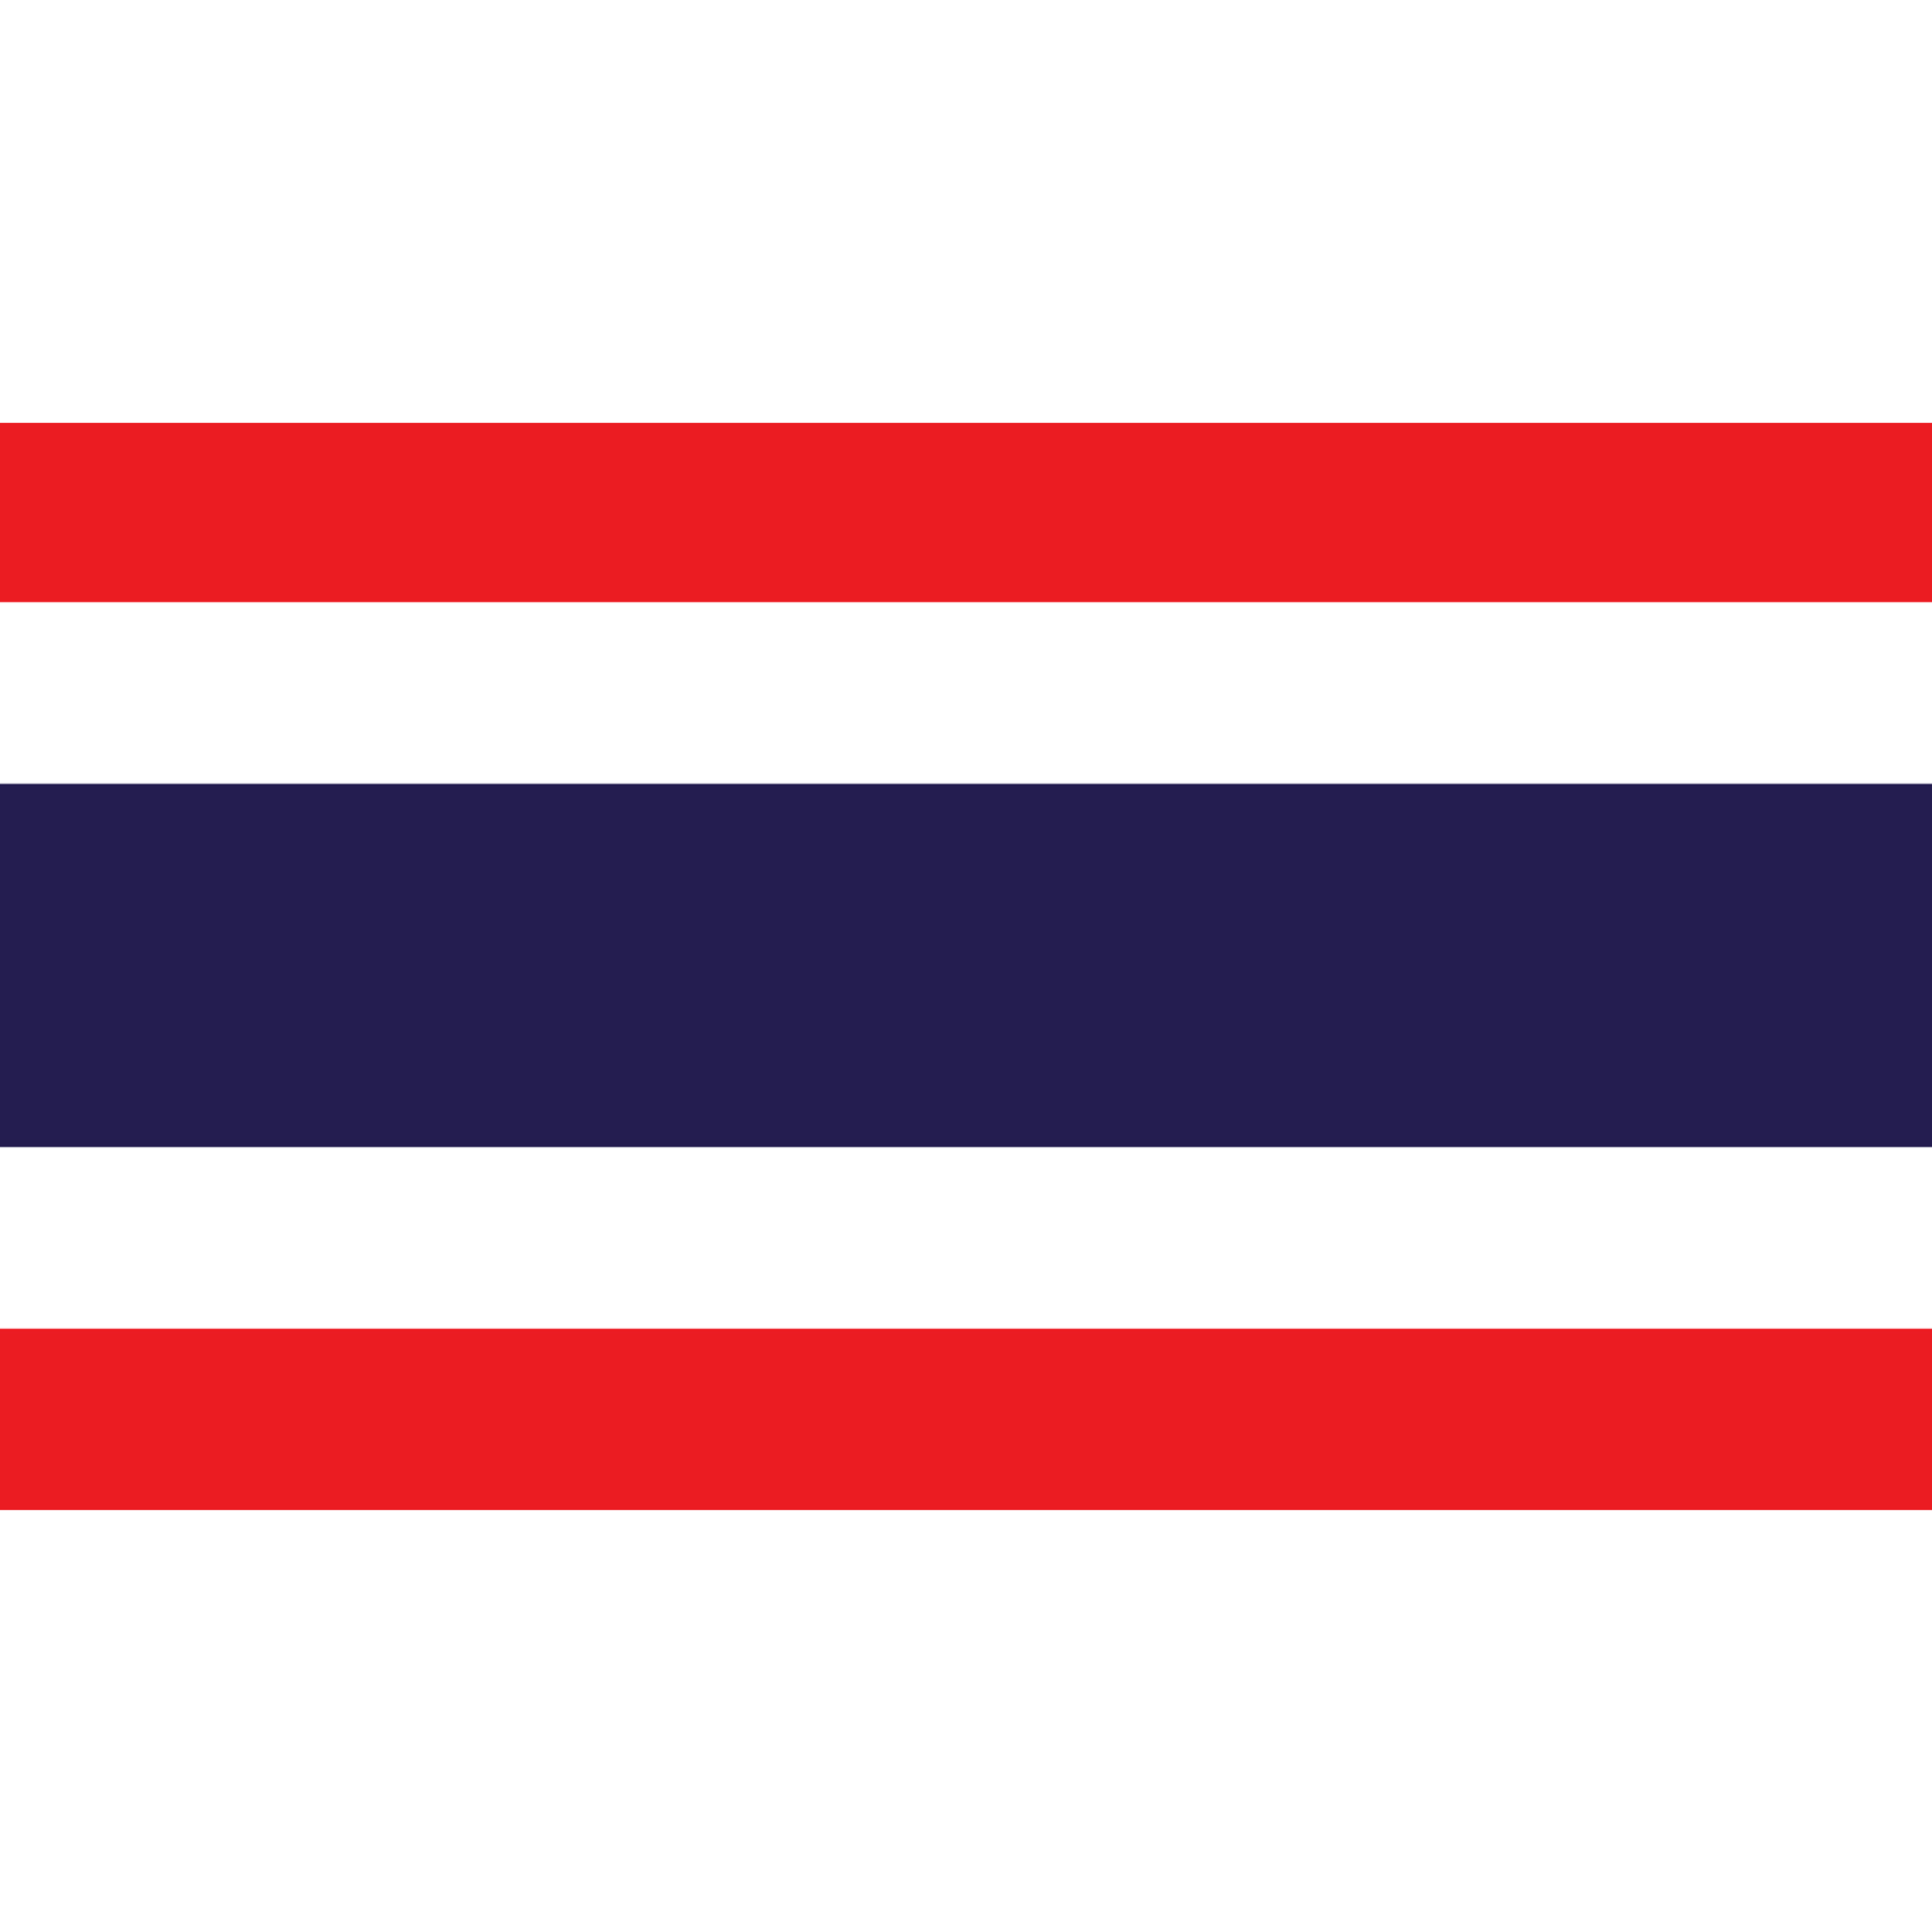 The flag of Thailand consists of 5 horizontal bands in red, white, blue (double width), white and red.